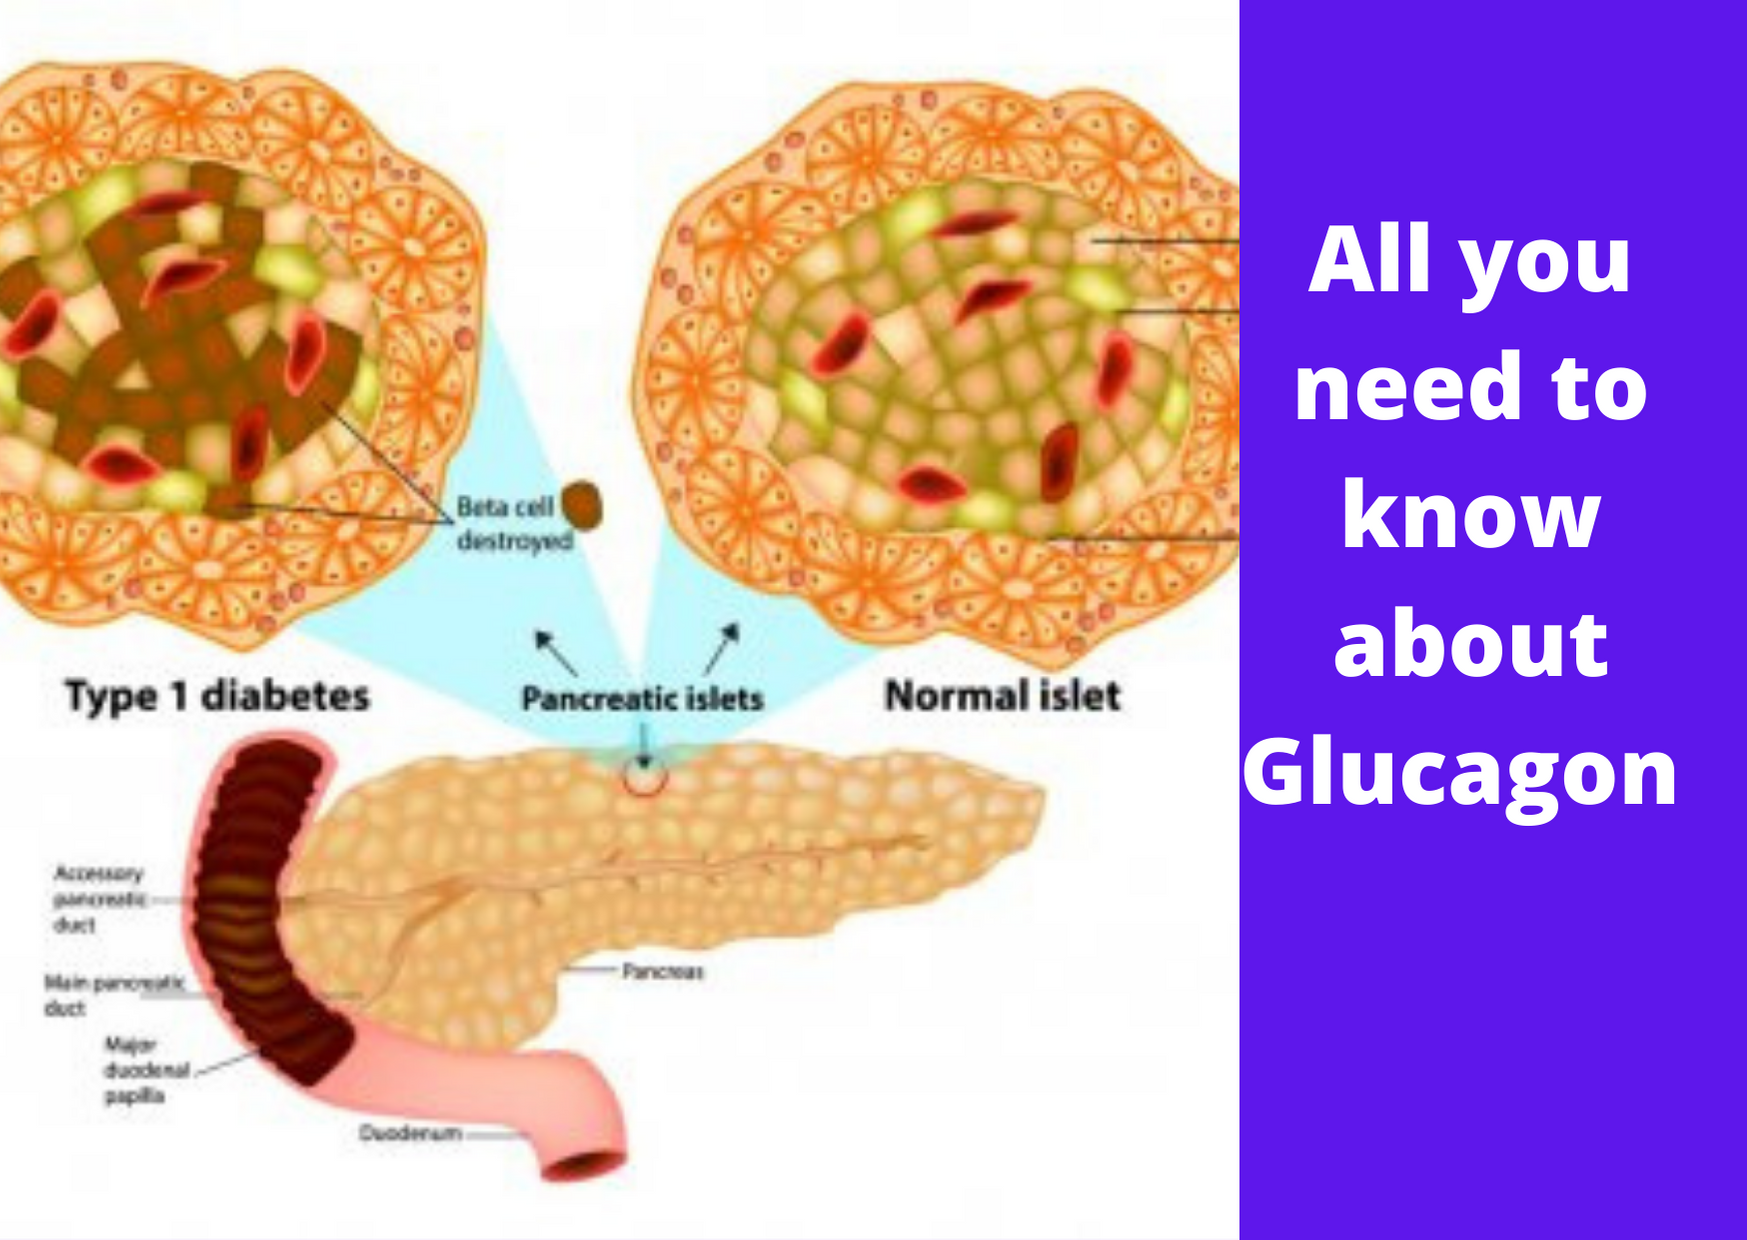 All you need to know about Glucagon